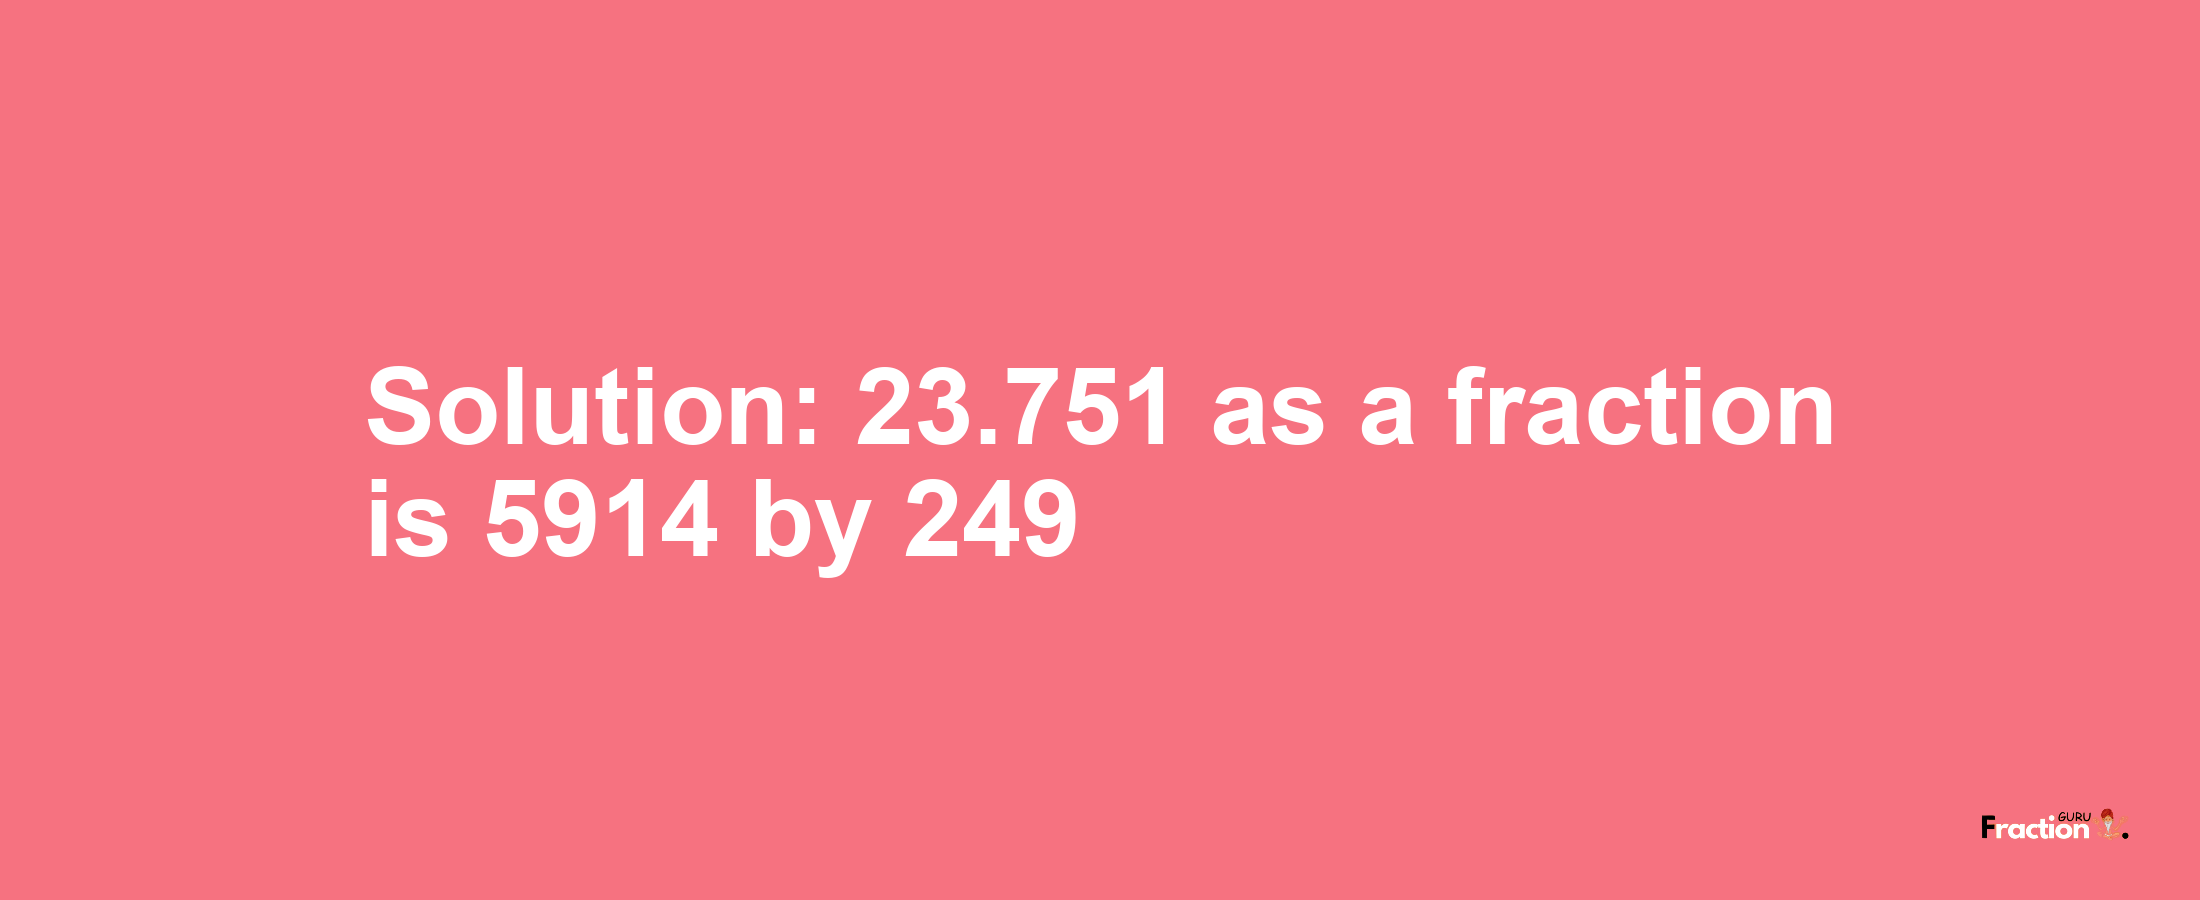 Solution:23.751 as a fraction is 5914/249